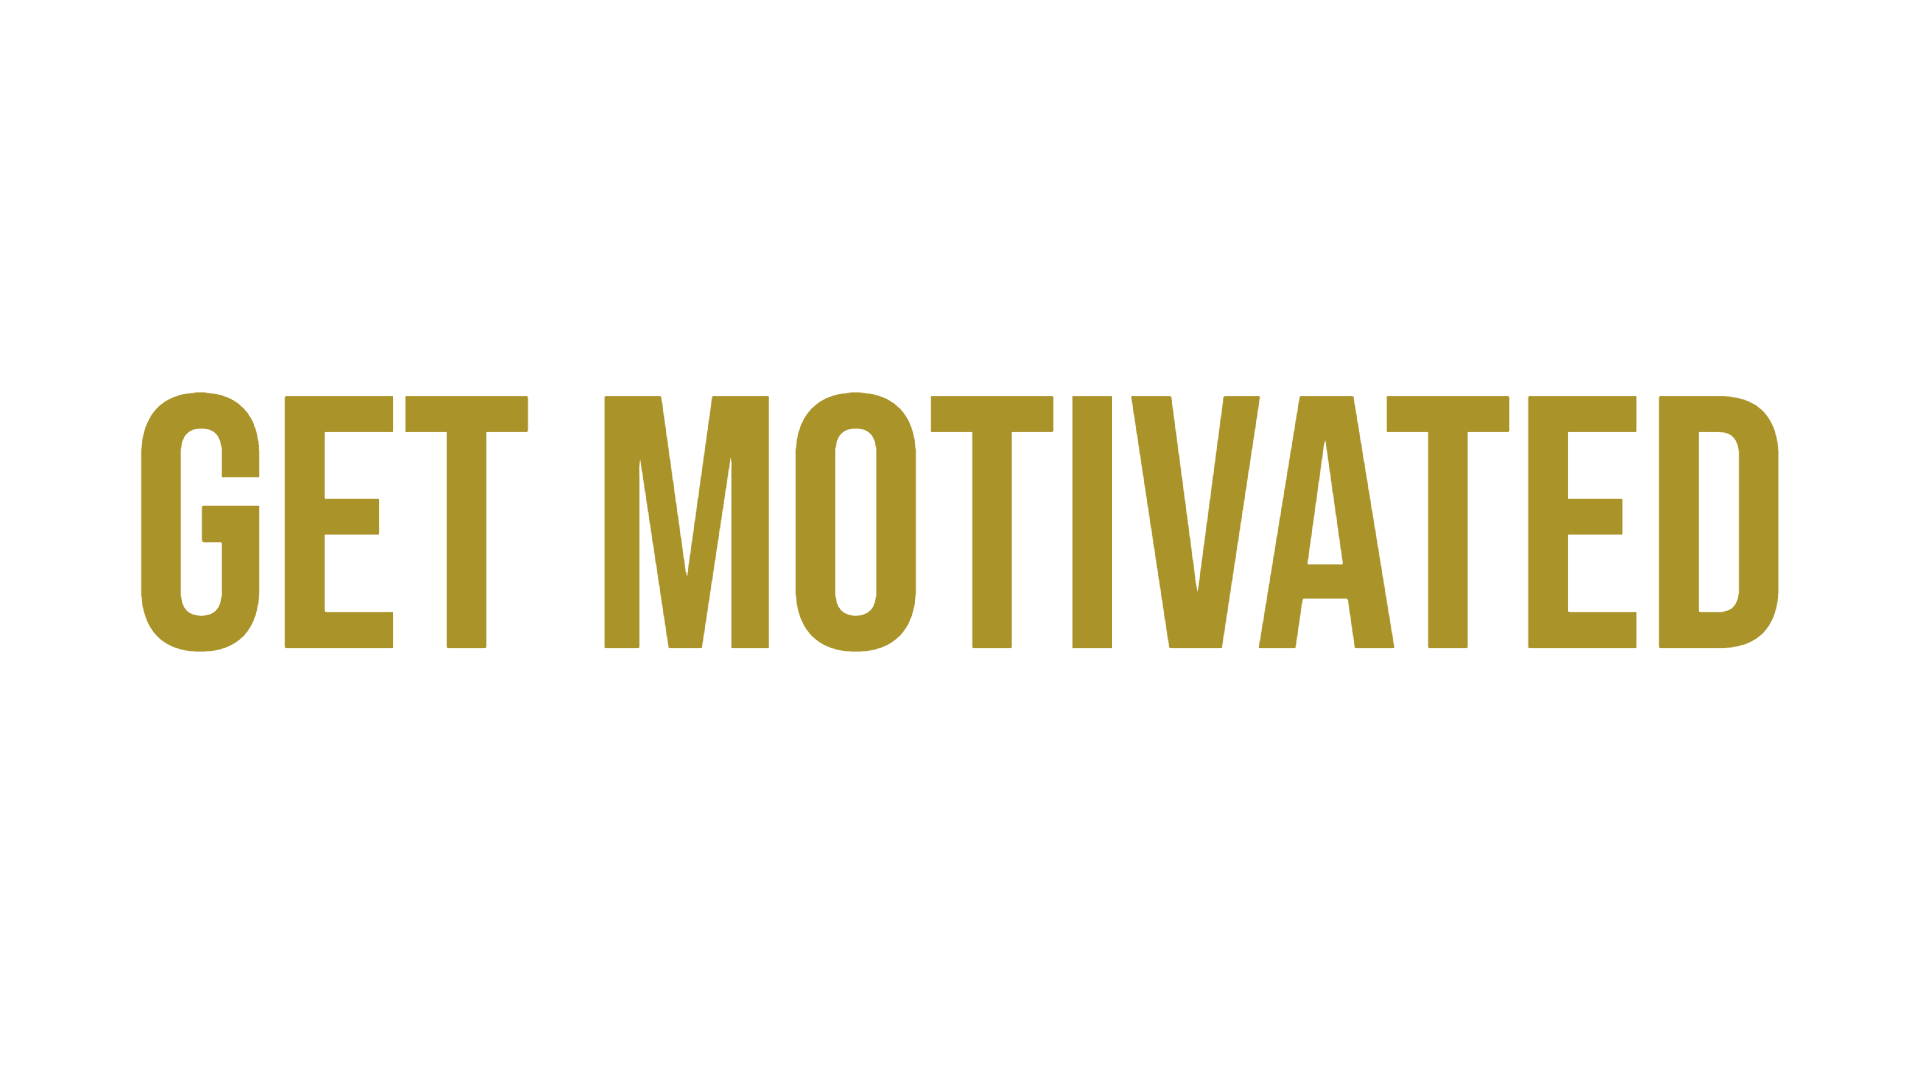 Get motivated GOLD